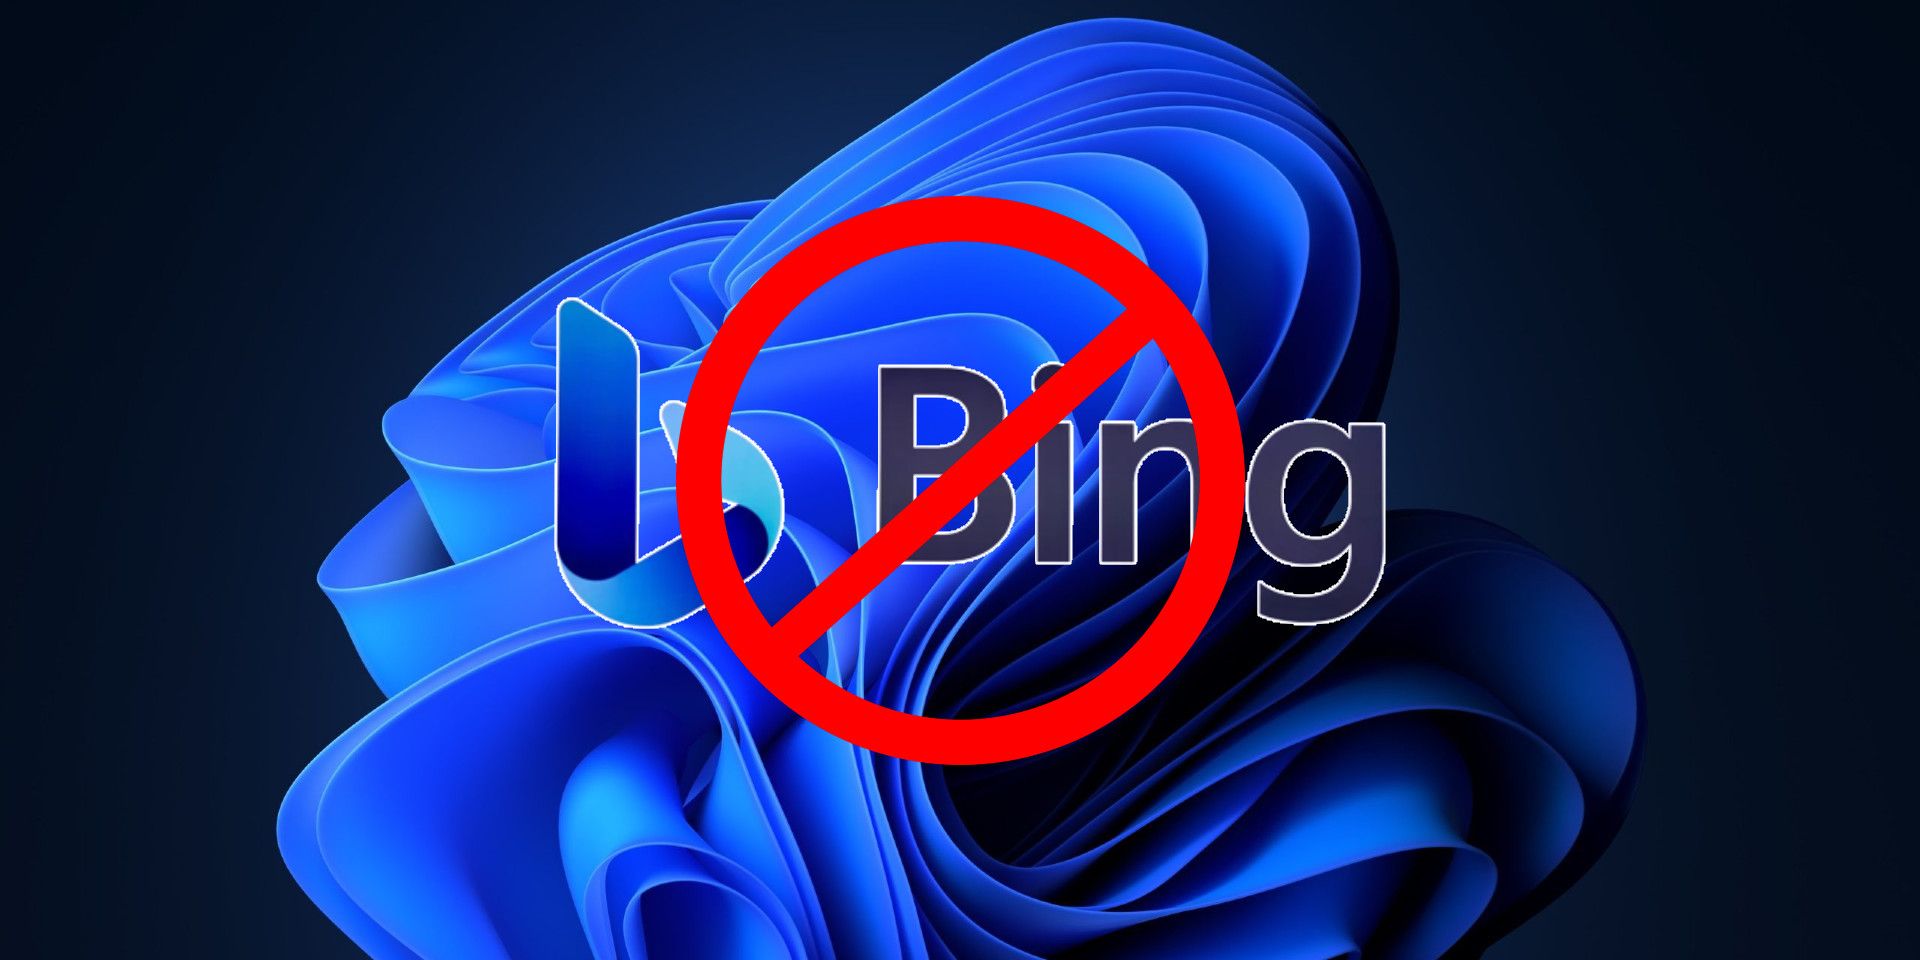 A Bing logo superimposed with a red cancel sign, on Windows 11's blue ribbon wallpaper in the background